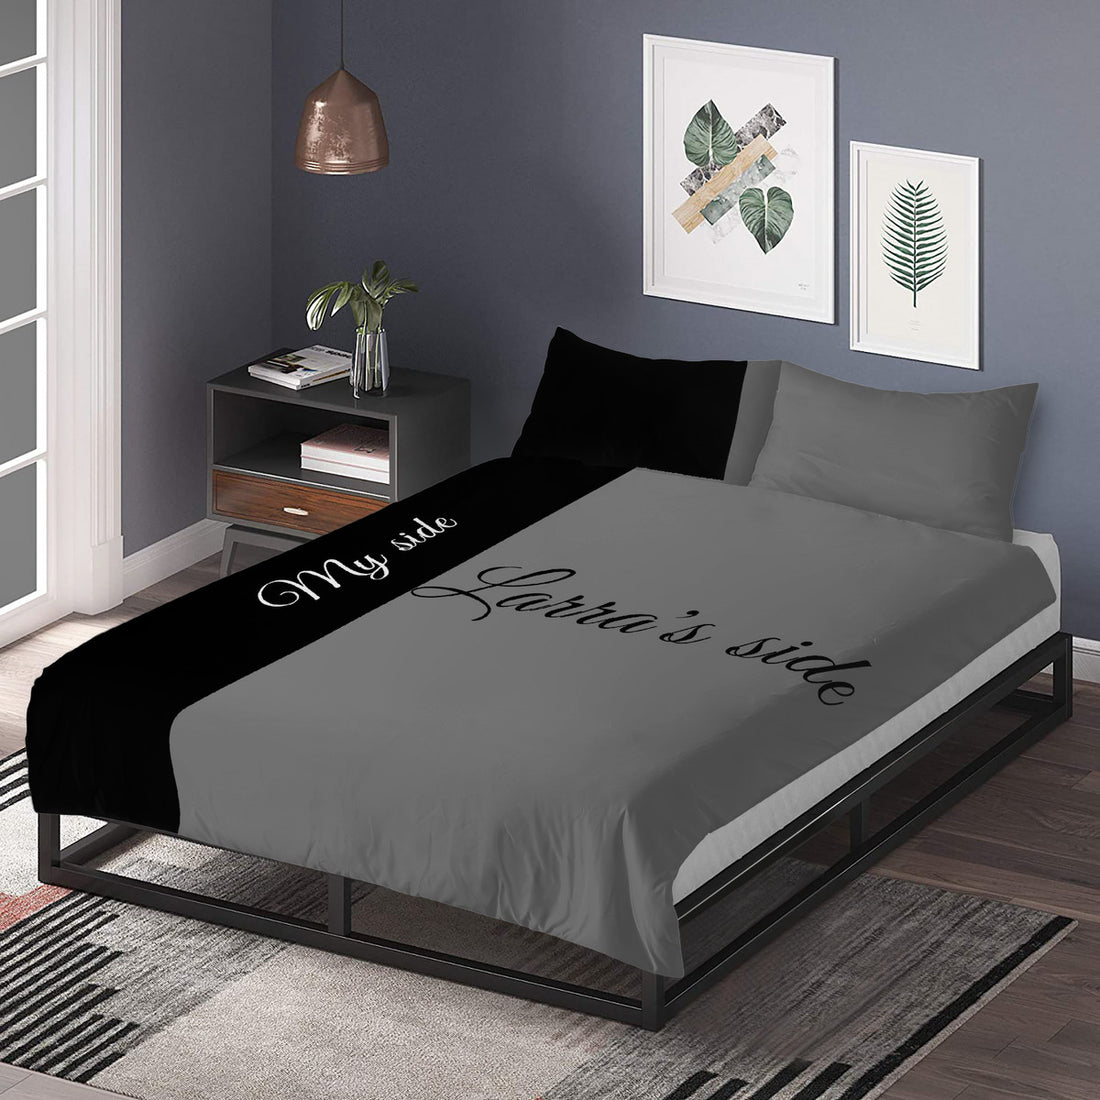 Beddings Customized Home-clothes-jewelry